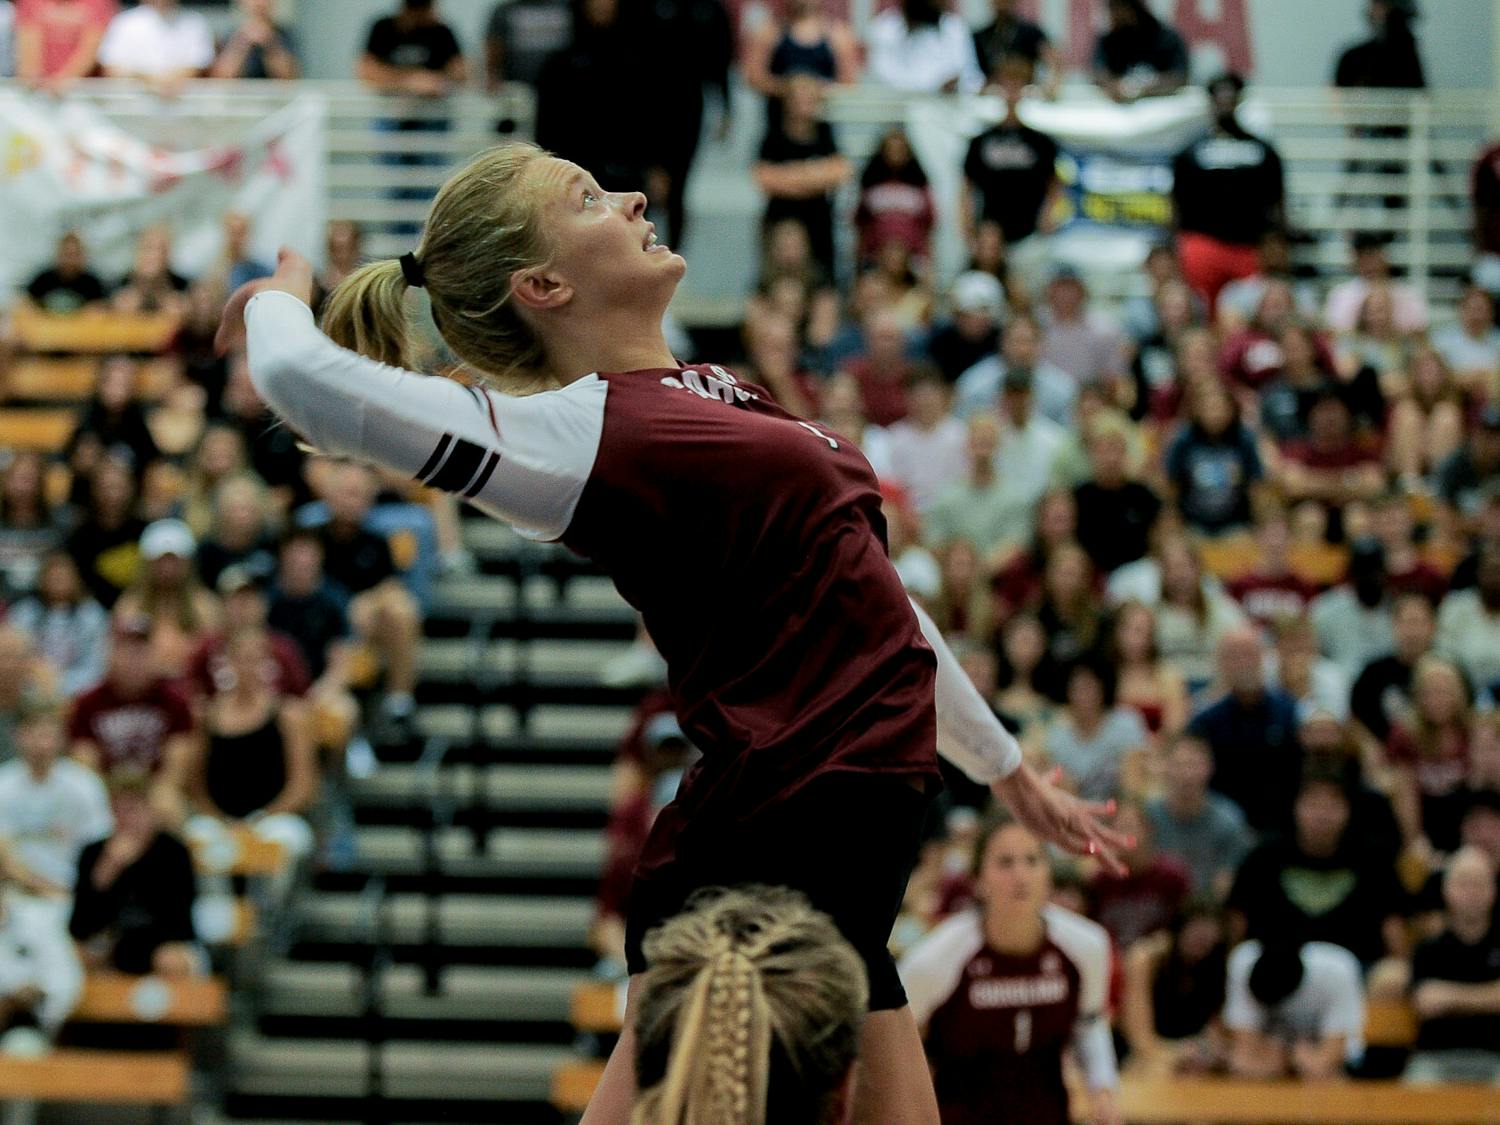 Senior outside hitter McKenzie Moorman jumps to hit the ball during the third and final set against Omaha during the Carolina Classic on Aug. 27 at the Carolina Volleyball Center.